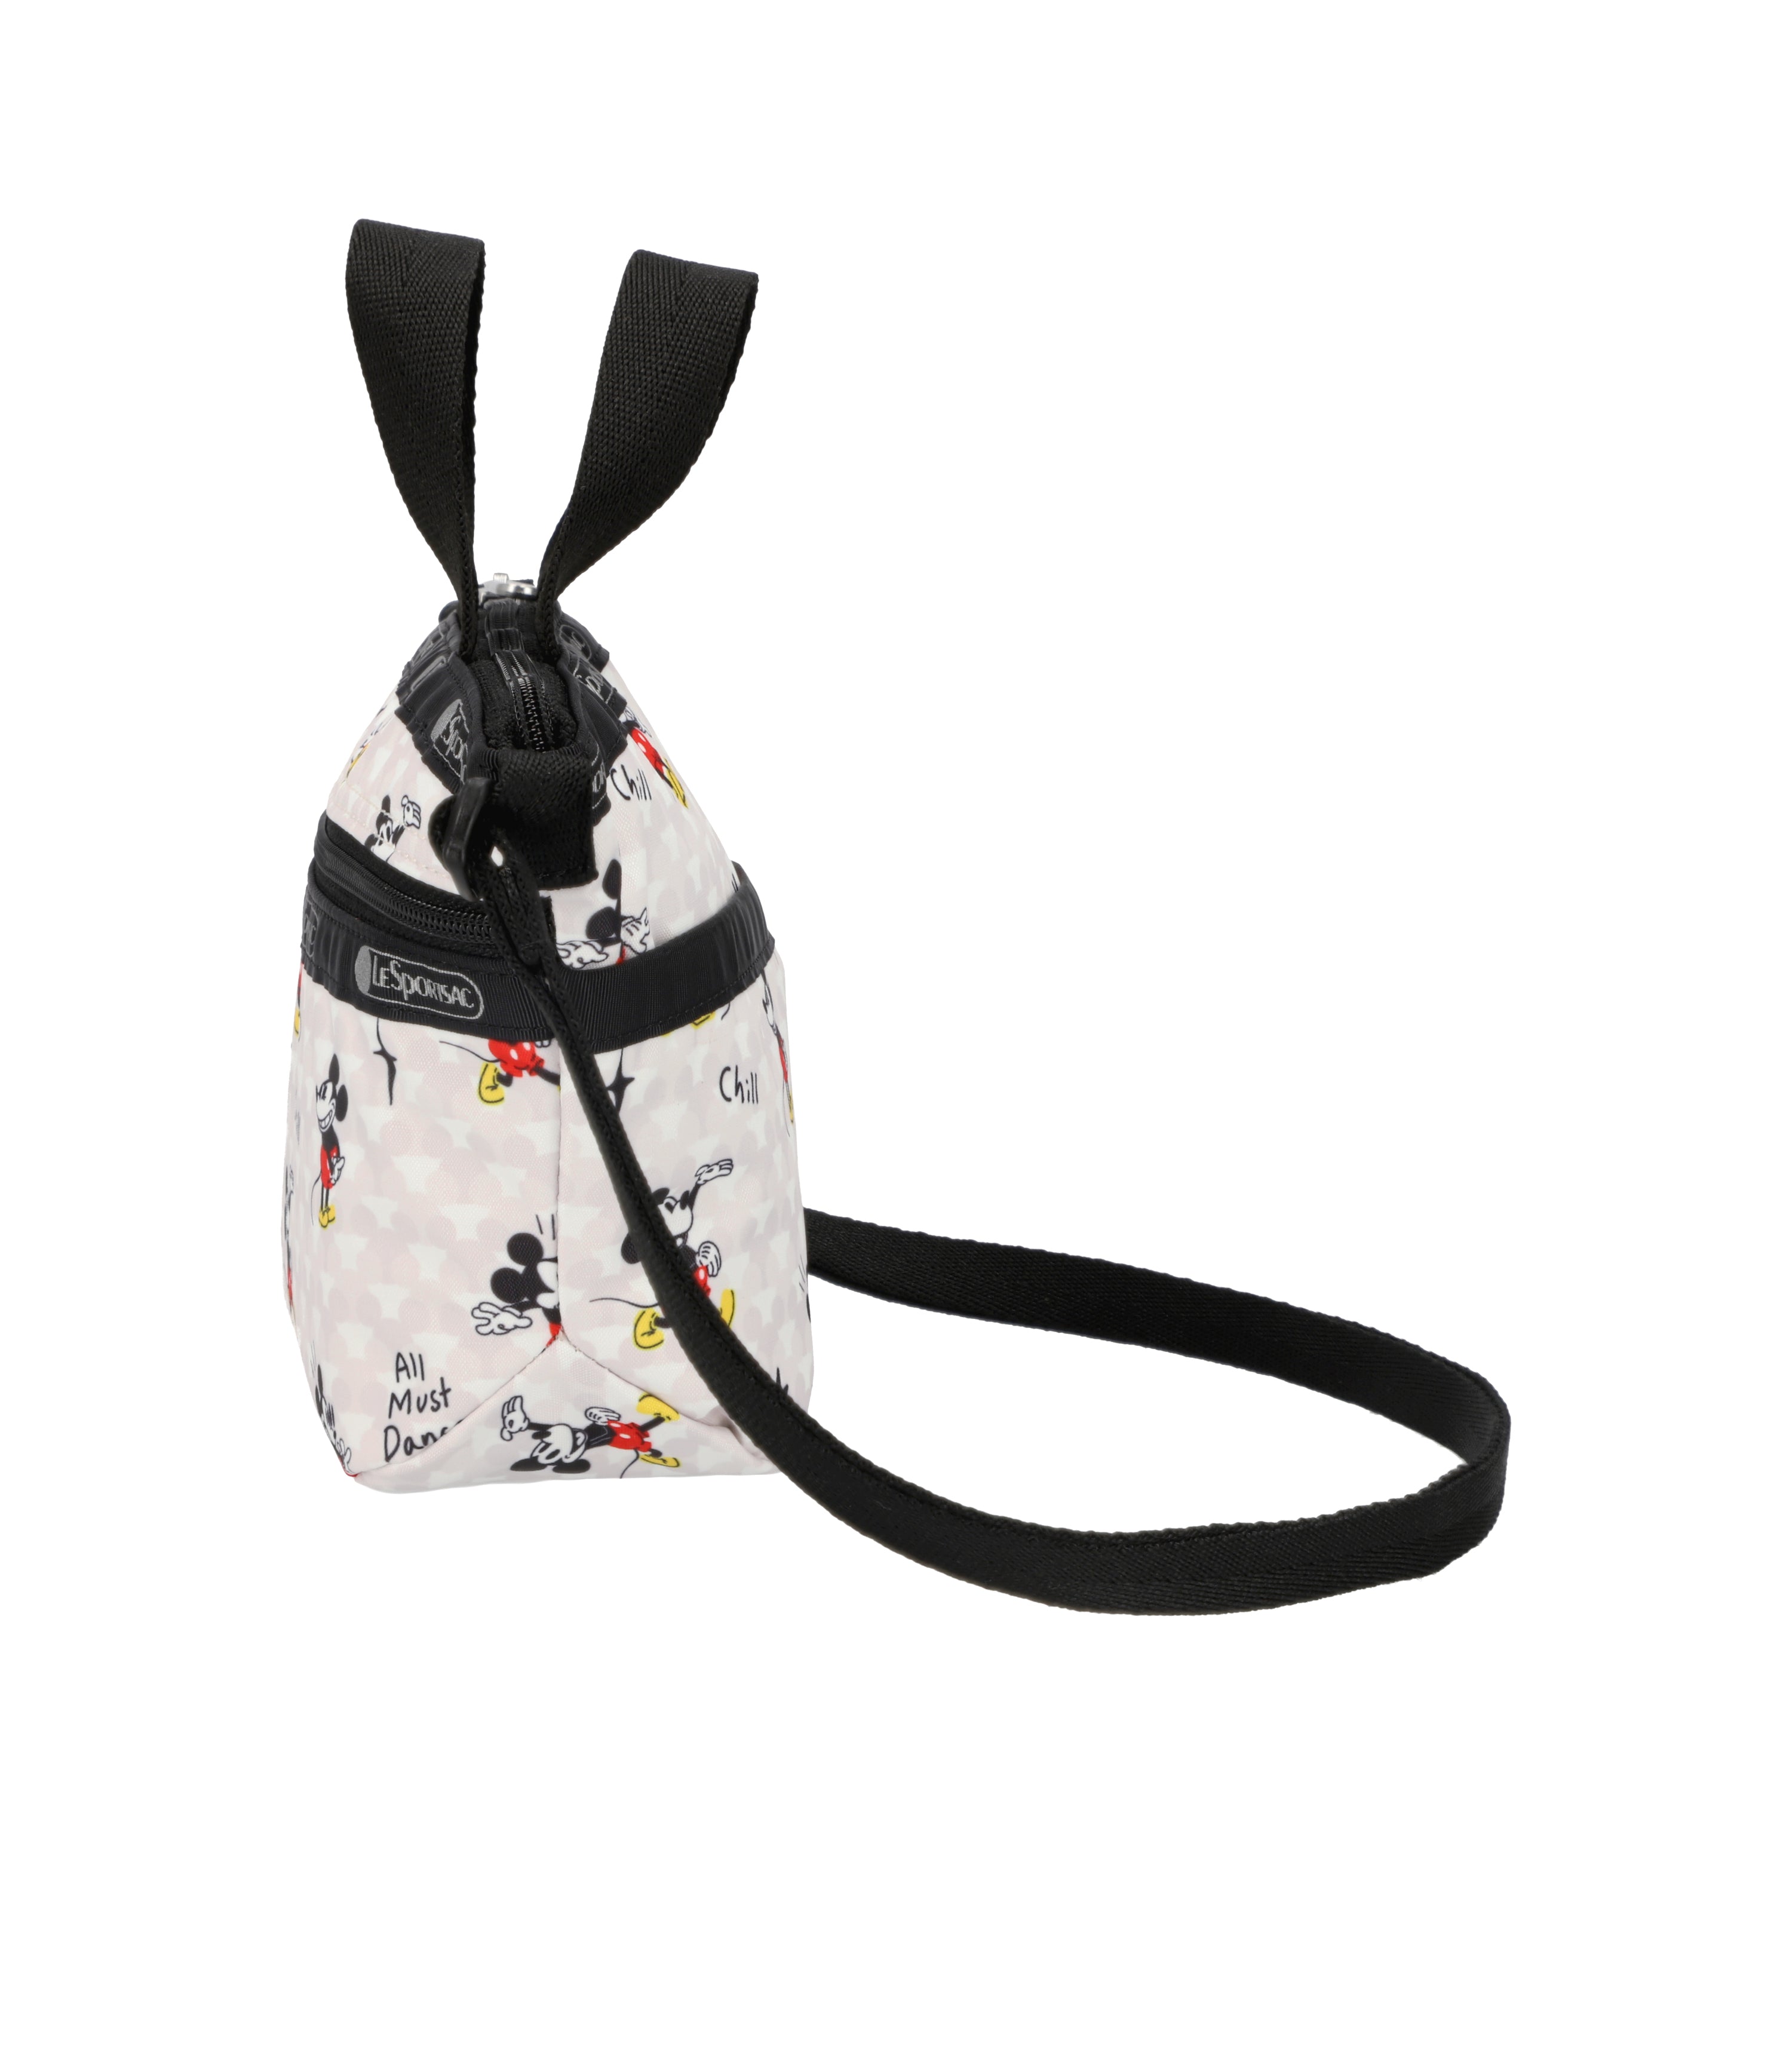 MICKEY MOUSE CROSS BODY BAG, ADJUSTABLE STRAP 11.5" X 7.5